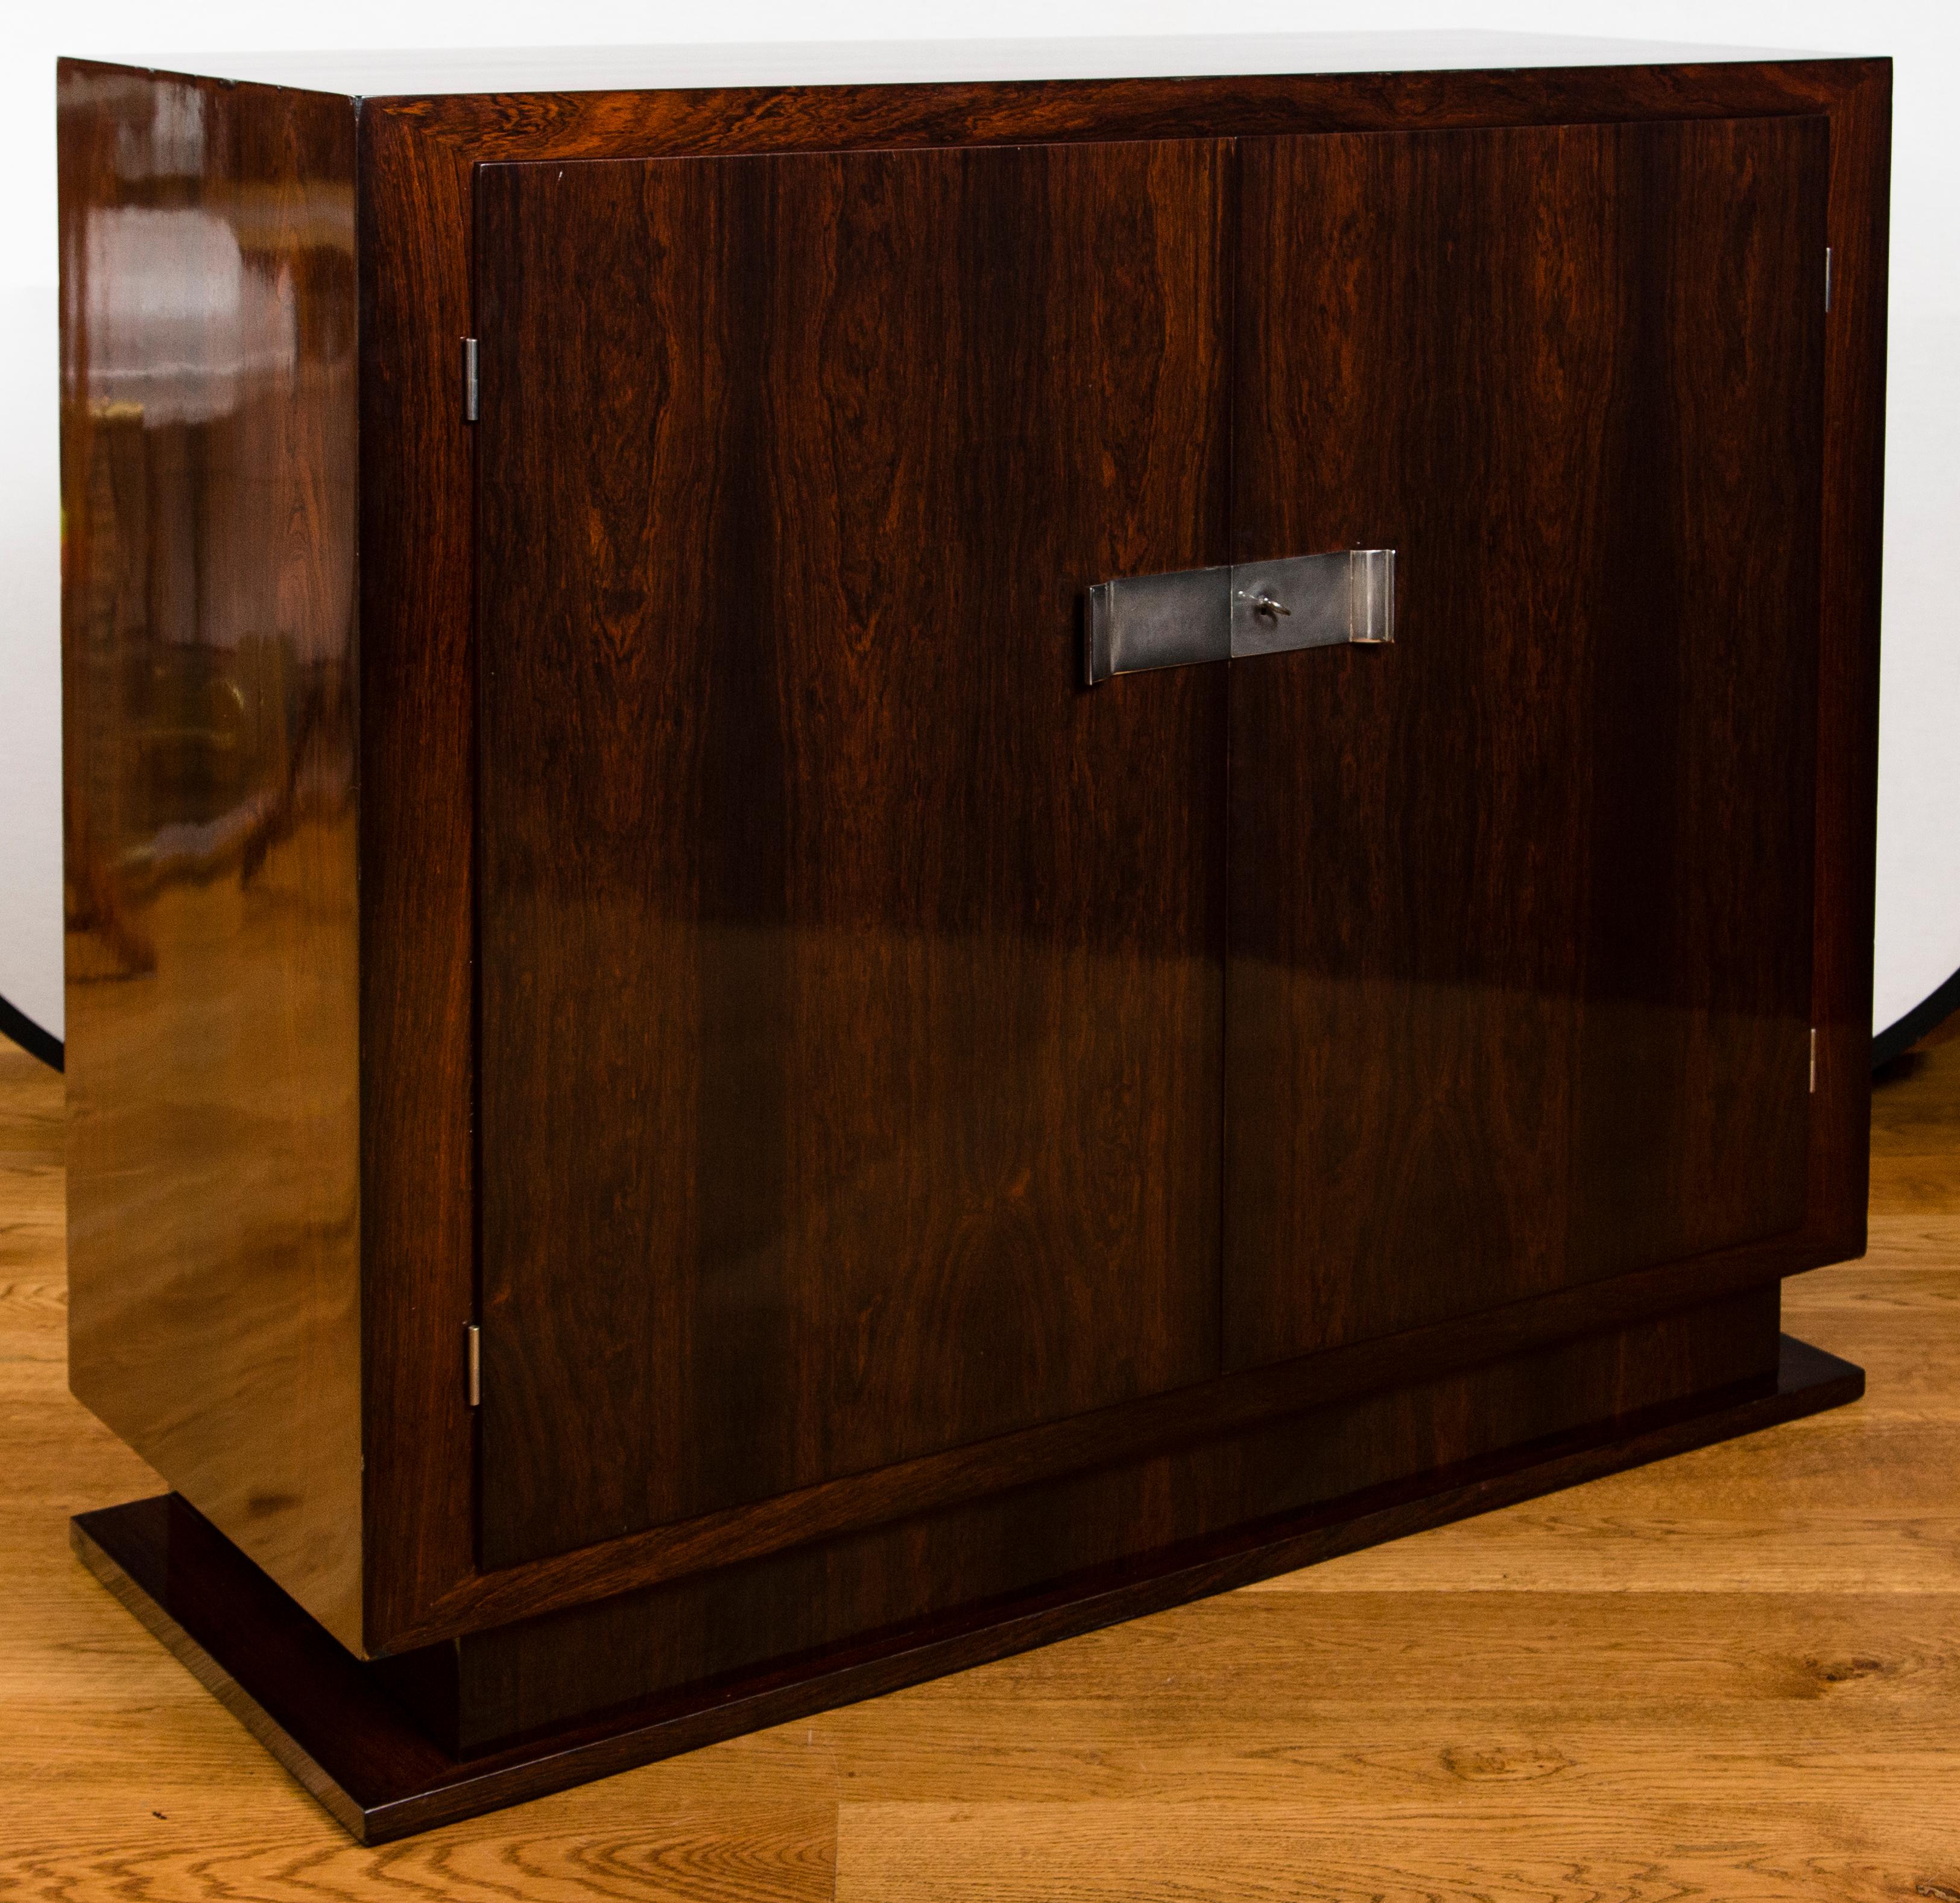 Sleek Art Moderne two-door cabinet finishing on a pedestal base shown with nickel plated hardware in beautiful rich stained rosewood veneer.